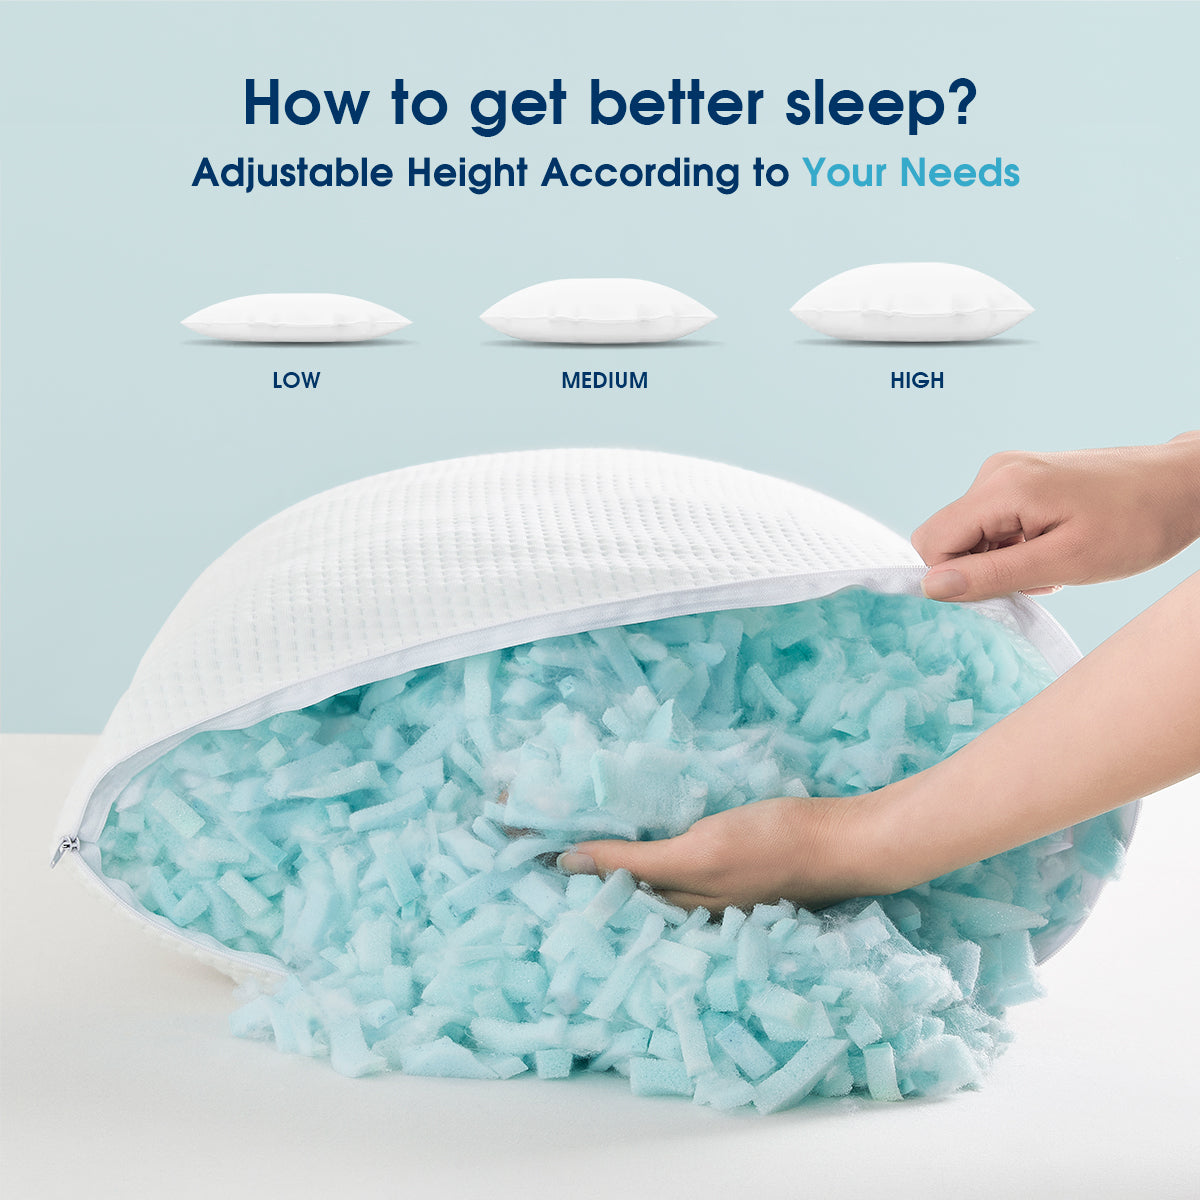 The pillow open to reveal the fresh memory foam filling inside, and the height of the pillow can be adjusted according to your needs